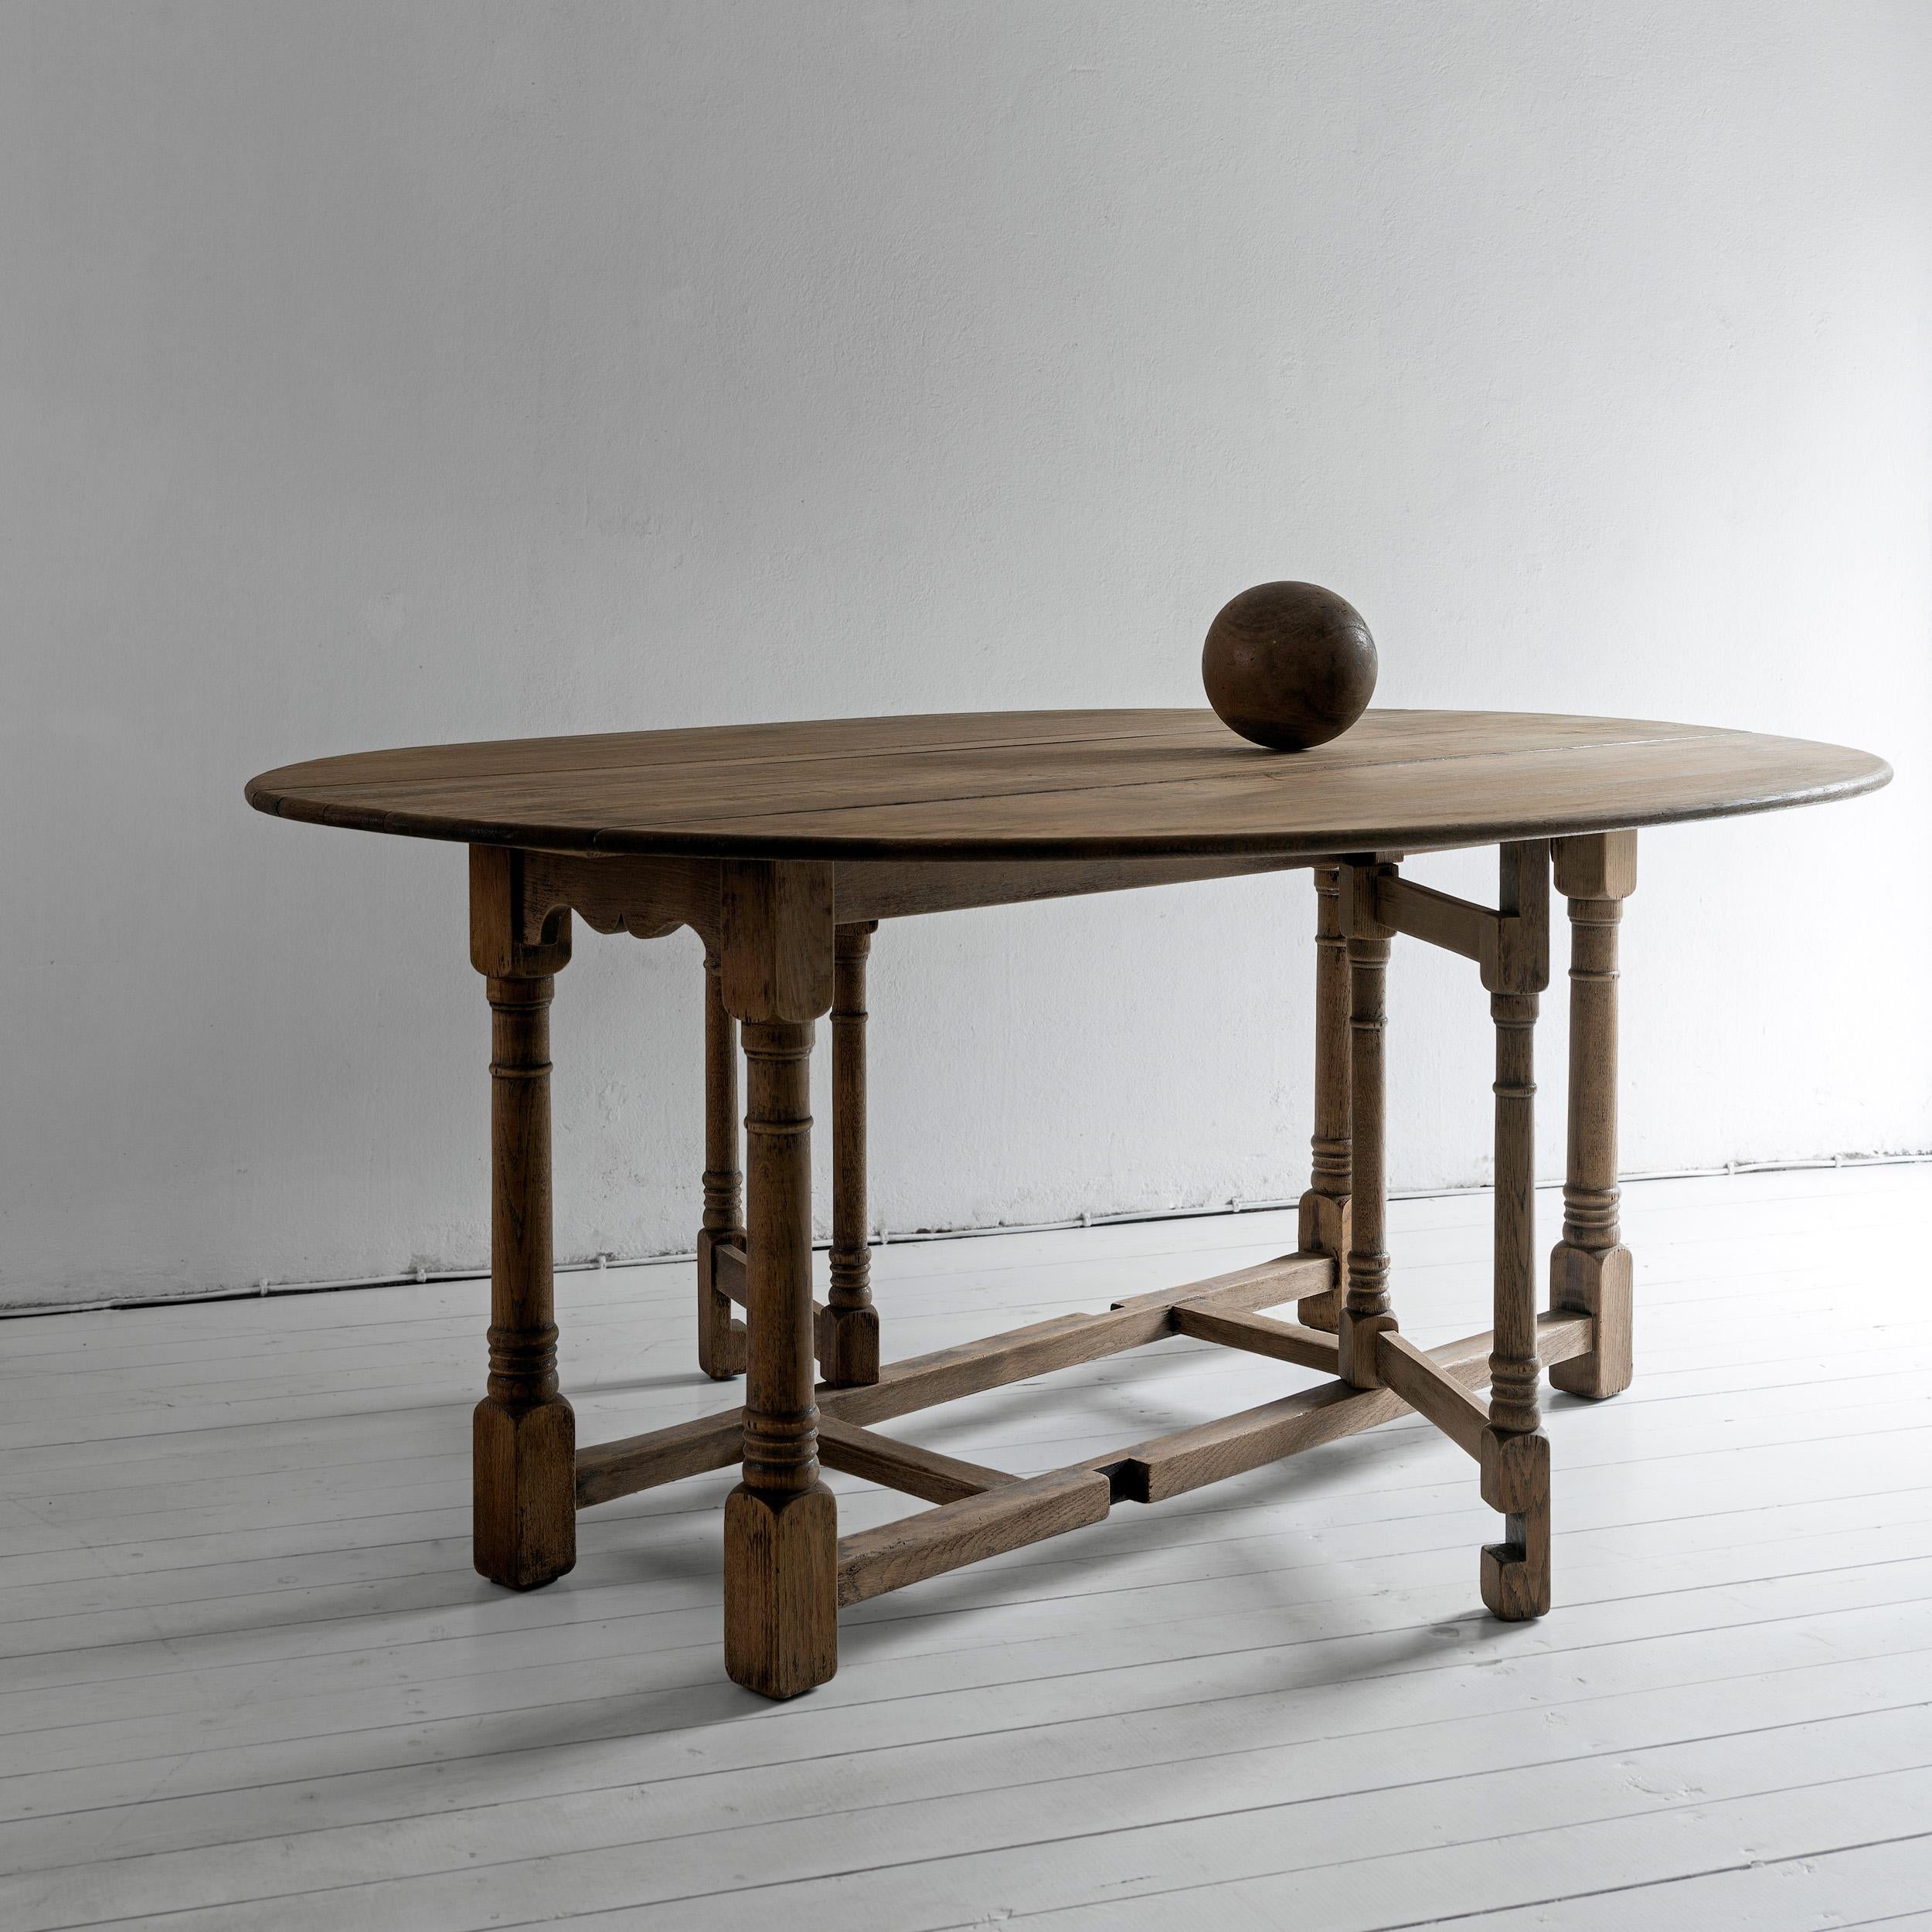 Bleached Large 19th Century Flemish Oval Drop-Leaf Dining Table of Great Proportions